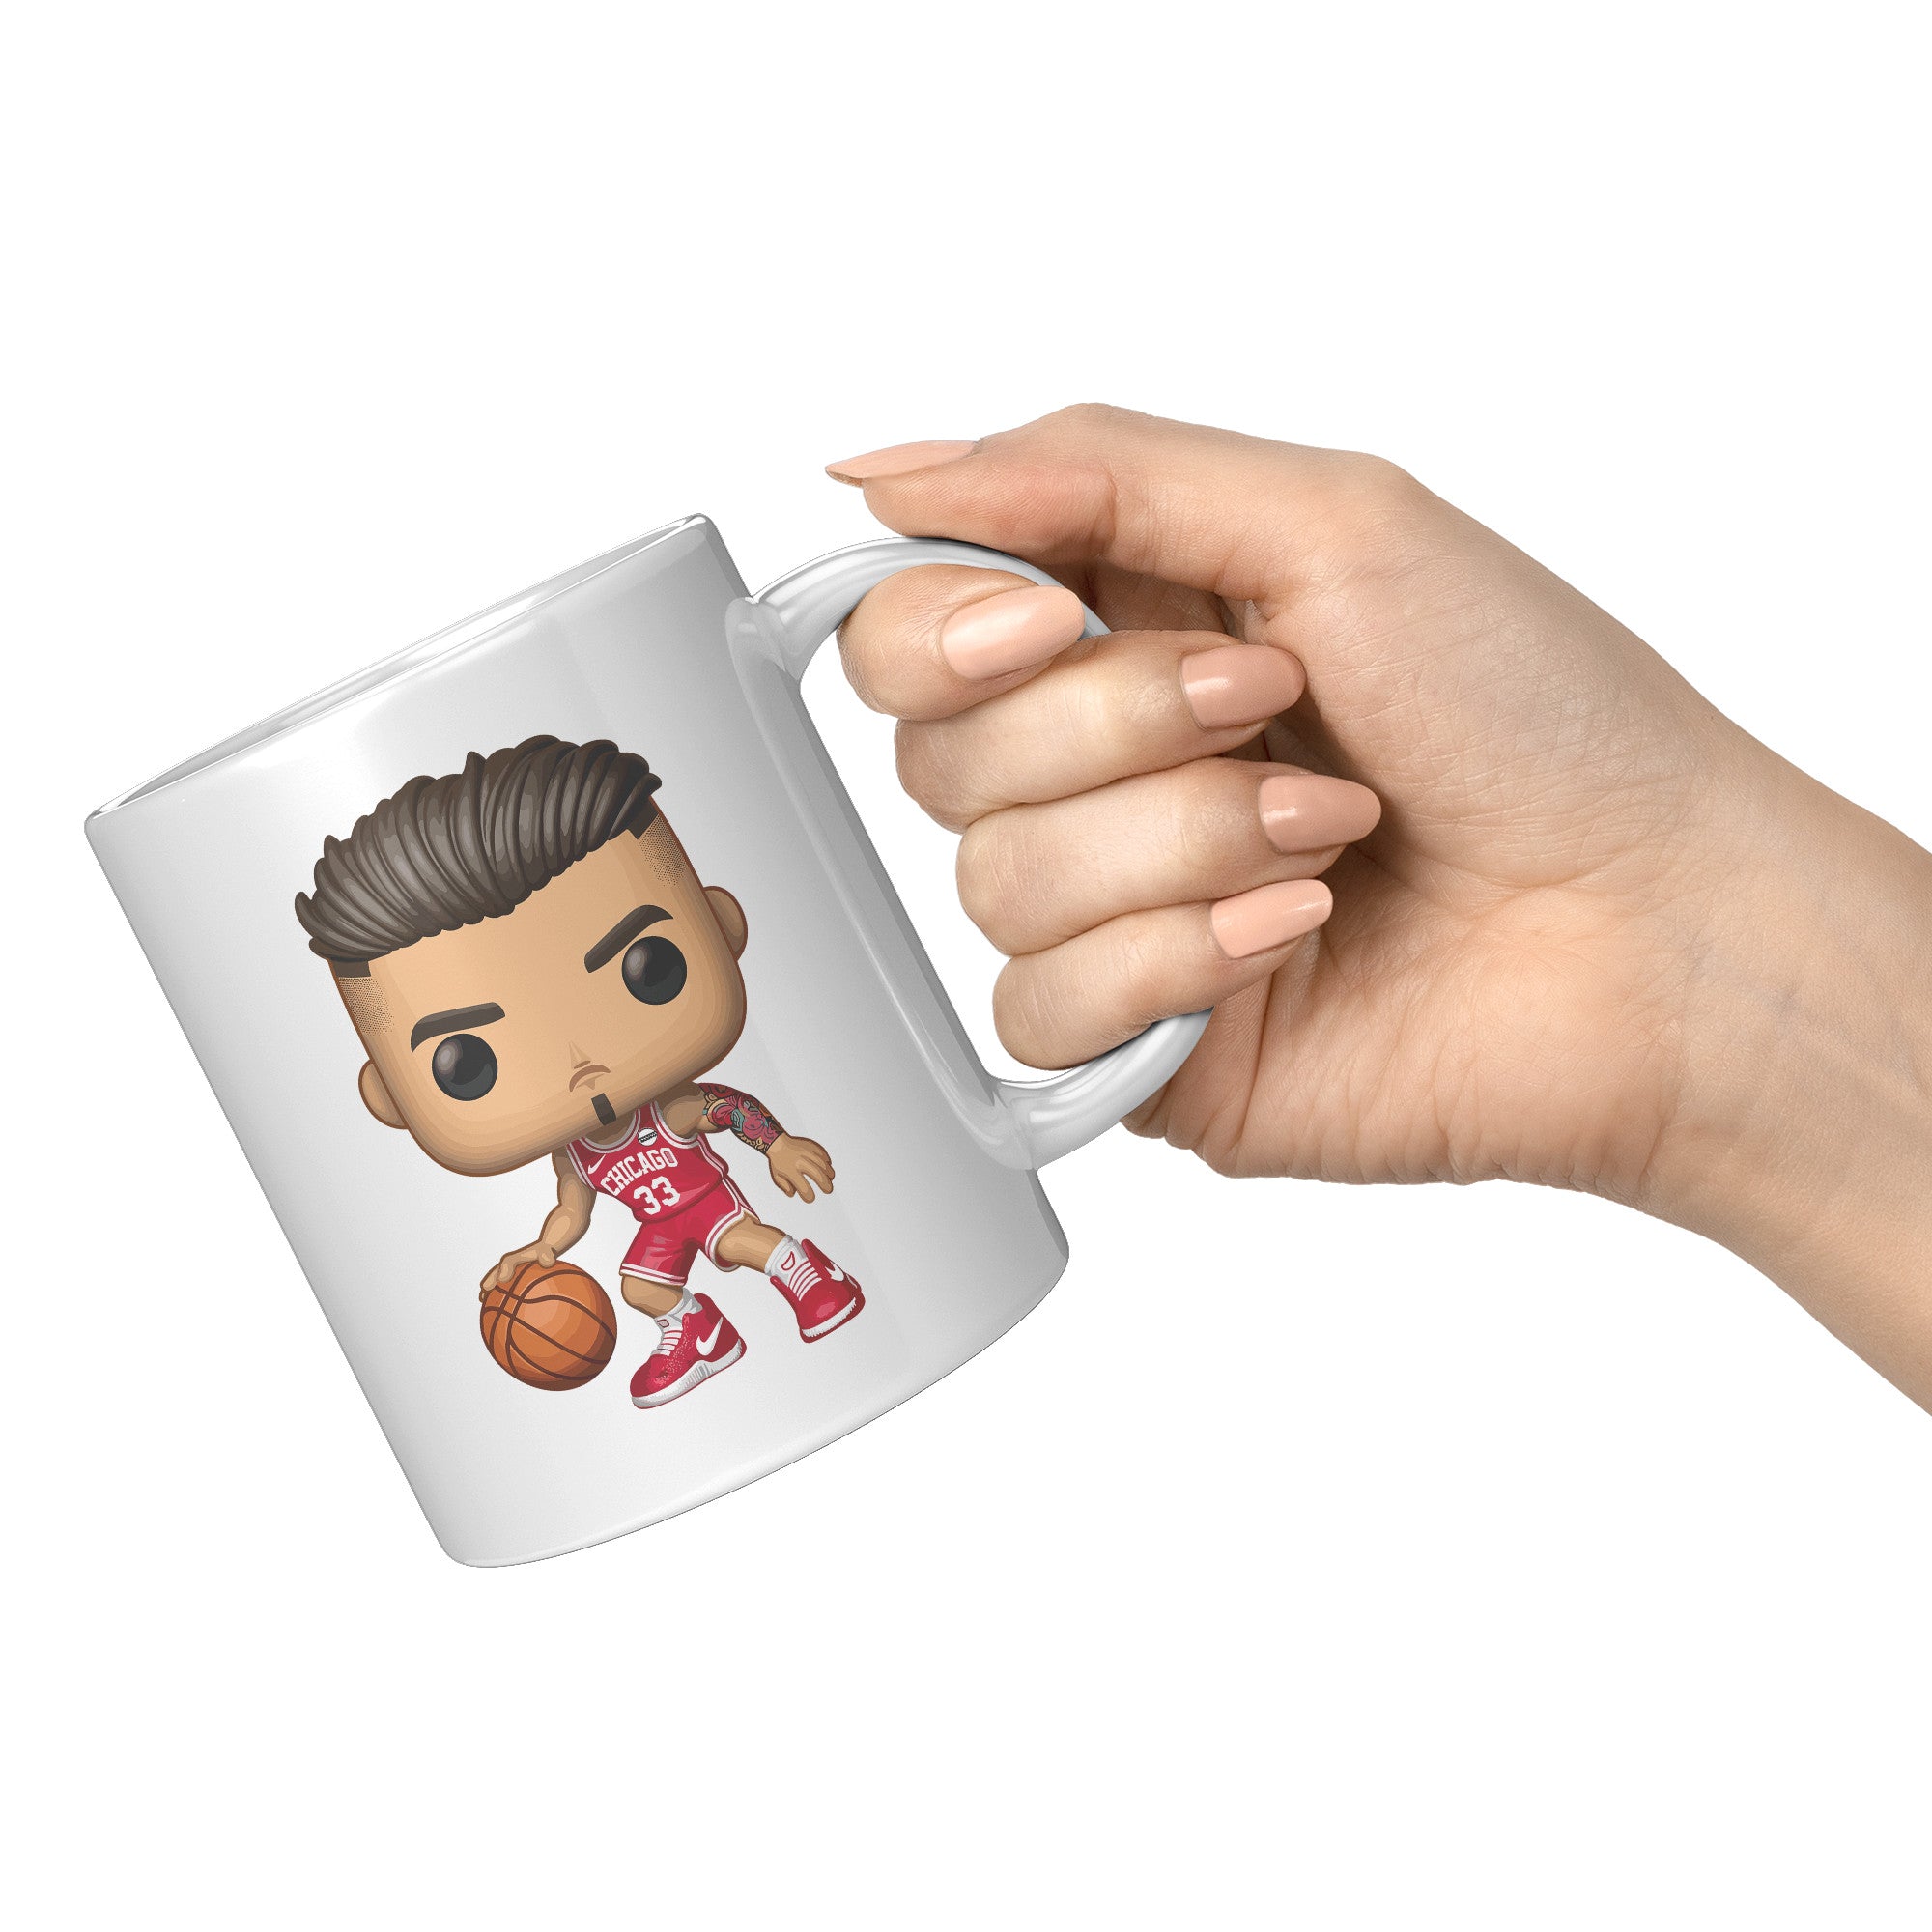 "Slam Dunk Basketball Coffee Mug - Hoops Enthusiast Cup- Perfect Gift for Basketball Players & Fans - Court-Ready Style Coffee Mug" - N